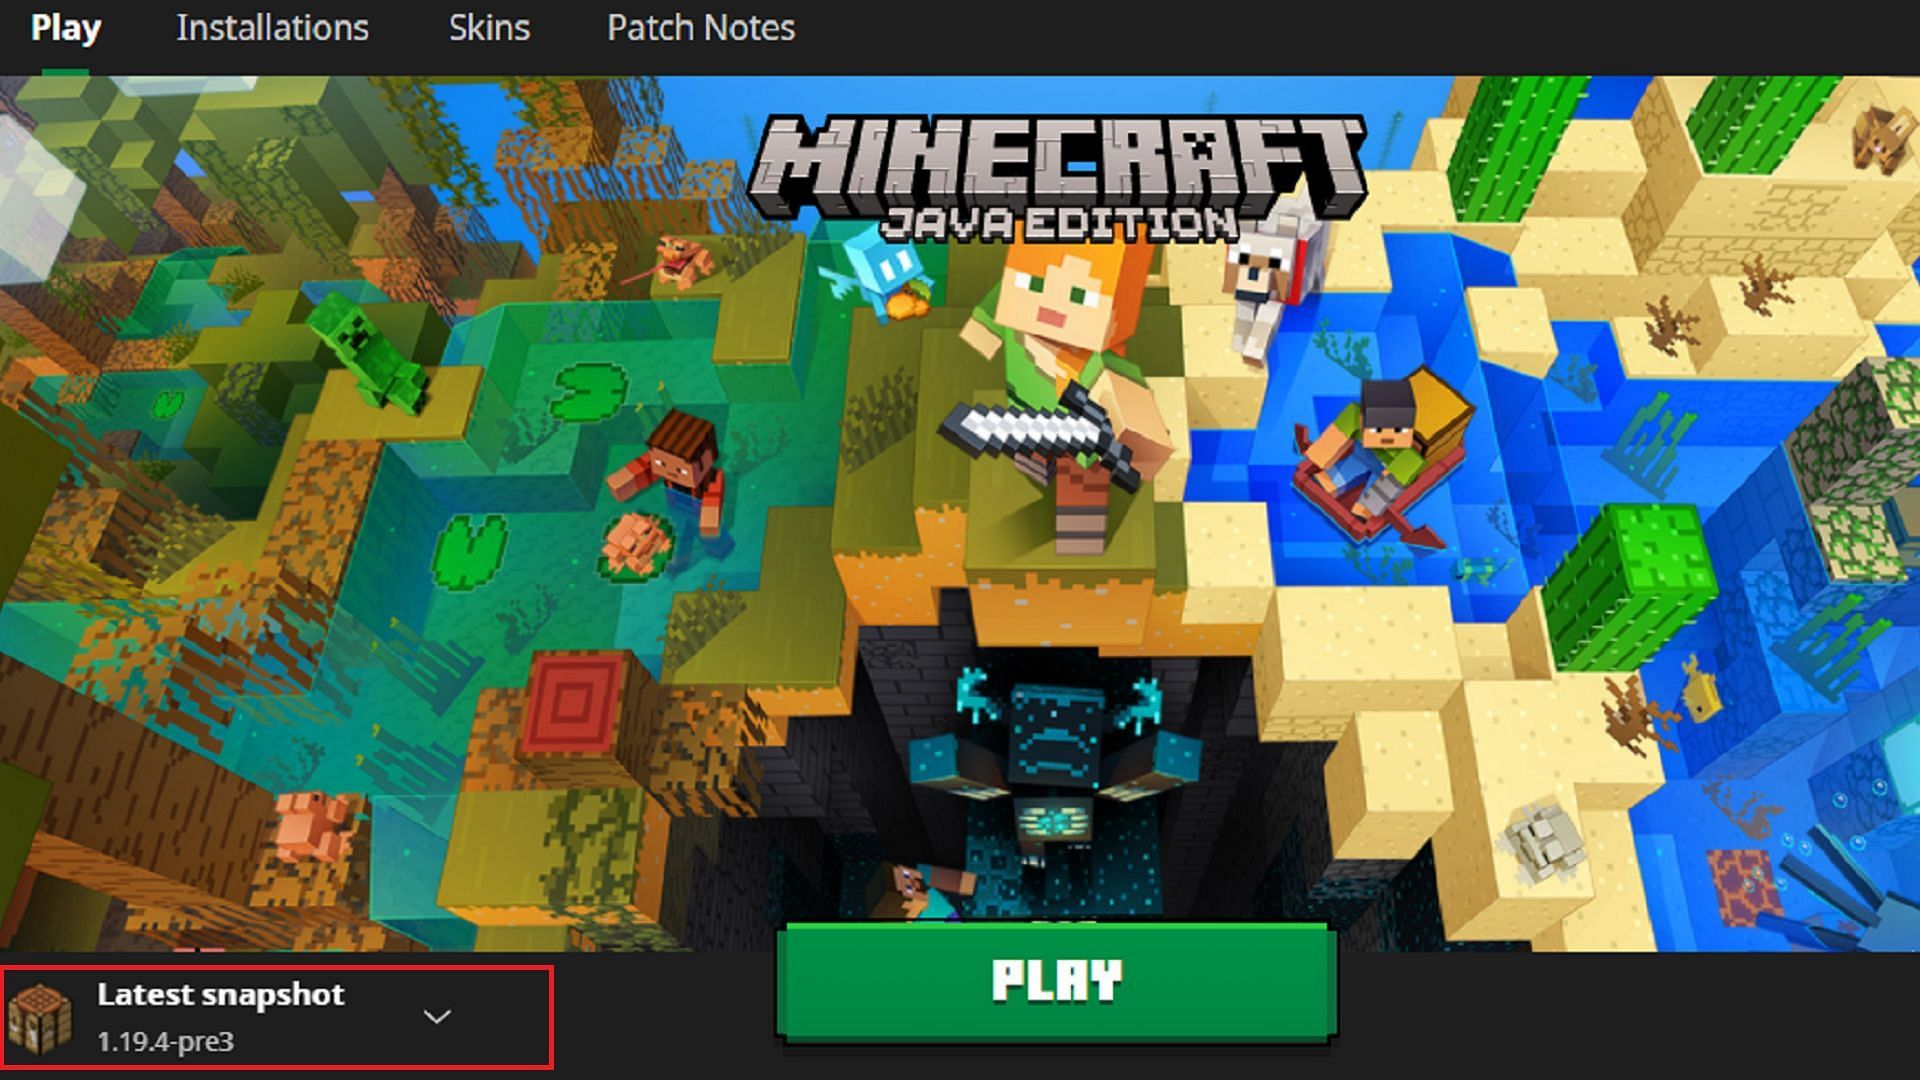 The Minecraft Launcher is the quickest and most efficient way to play the latest snapshot (Image via Mojang)